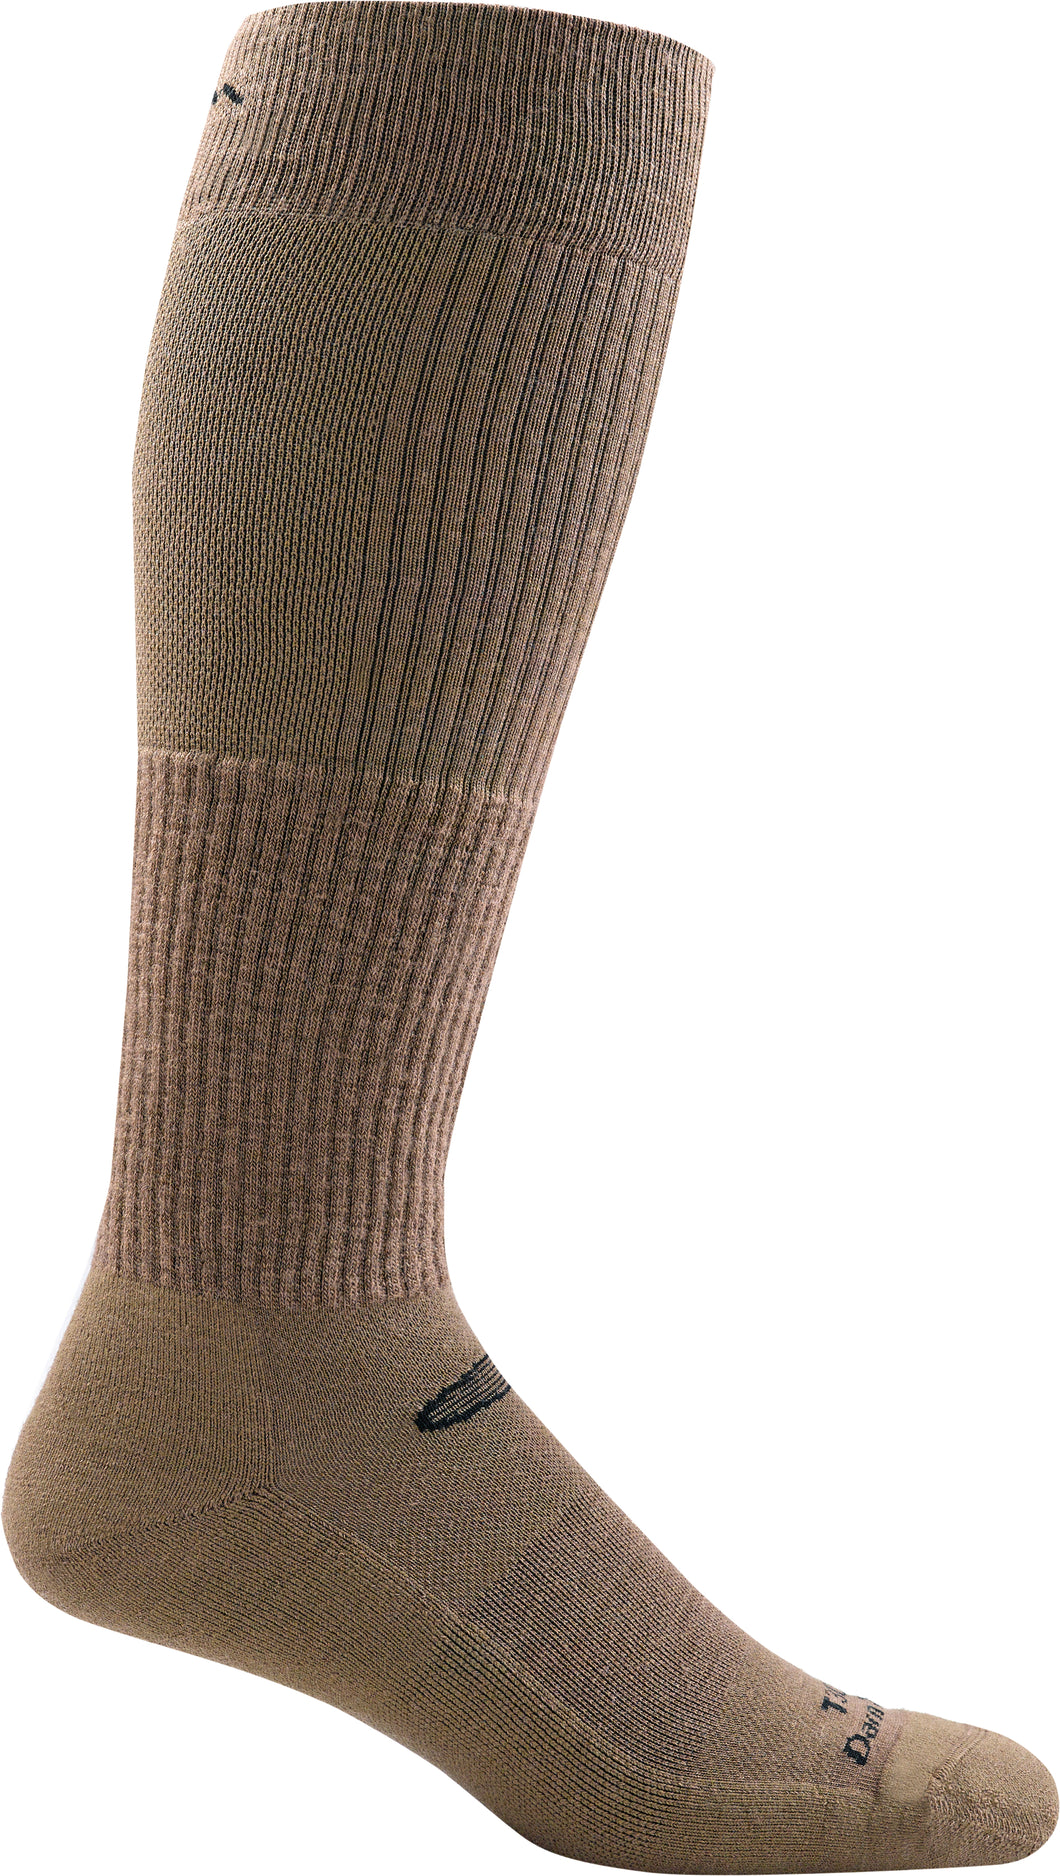 Darn Tough T3006 Tactical Series Merino Wool Over-the-Calf Lightweight Boot Socks with Cushion